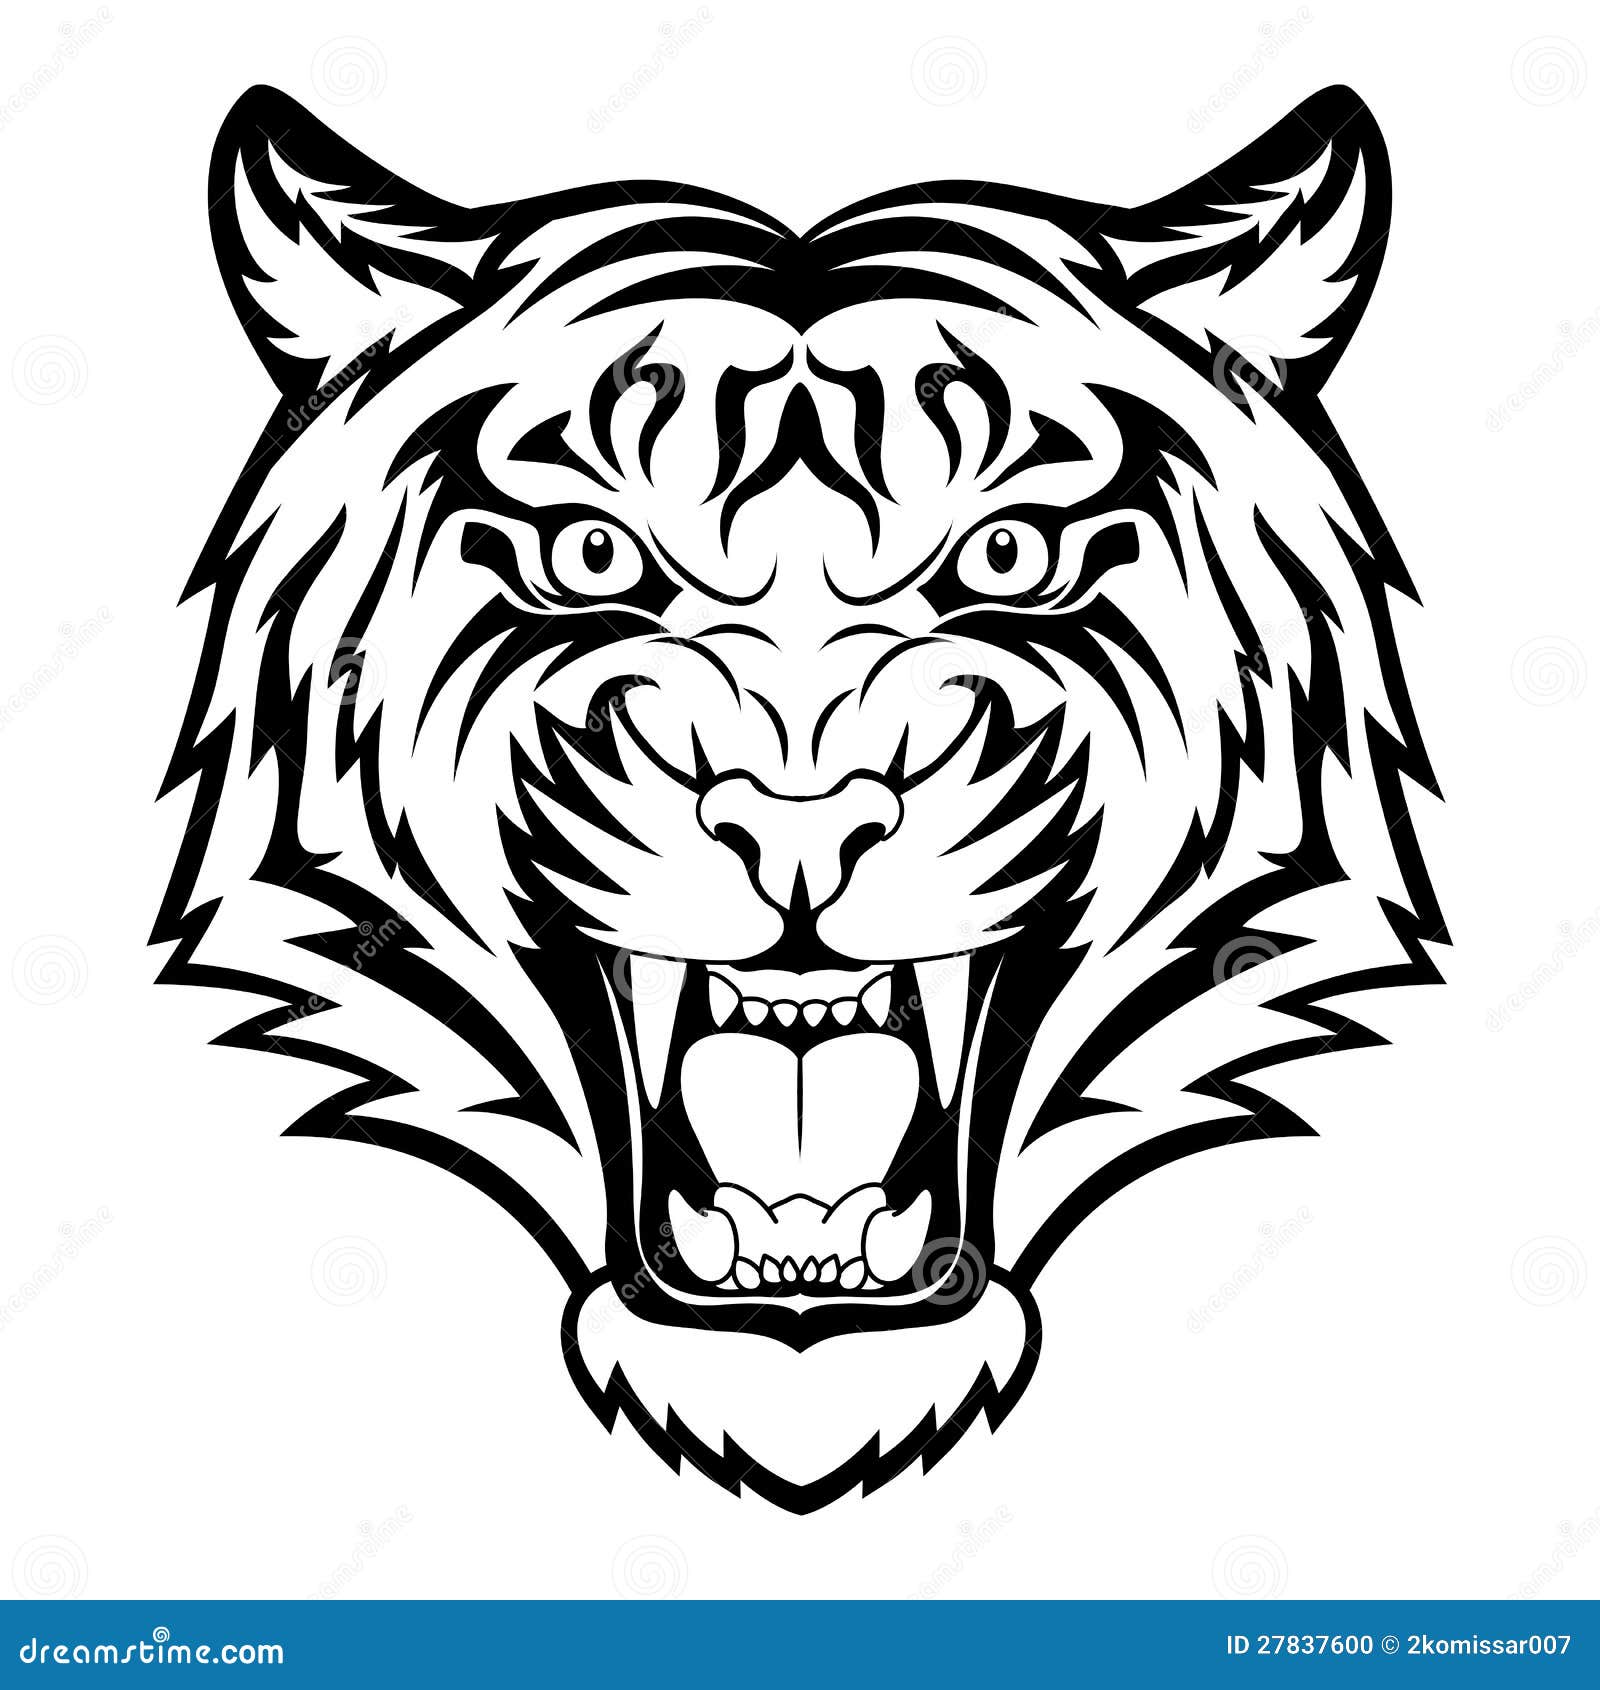 Tiger Head Vector Drawing, Tiger Face Drawing Sketch, Tiger Head in Black  and White Stock Vector - Illustration of black, beast: 137923302